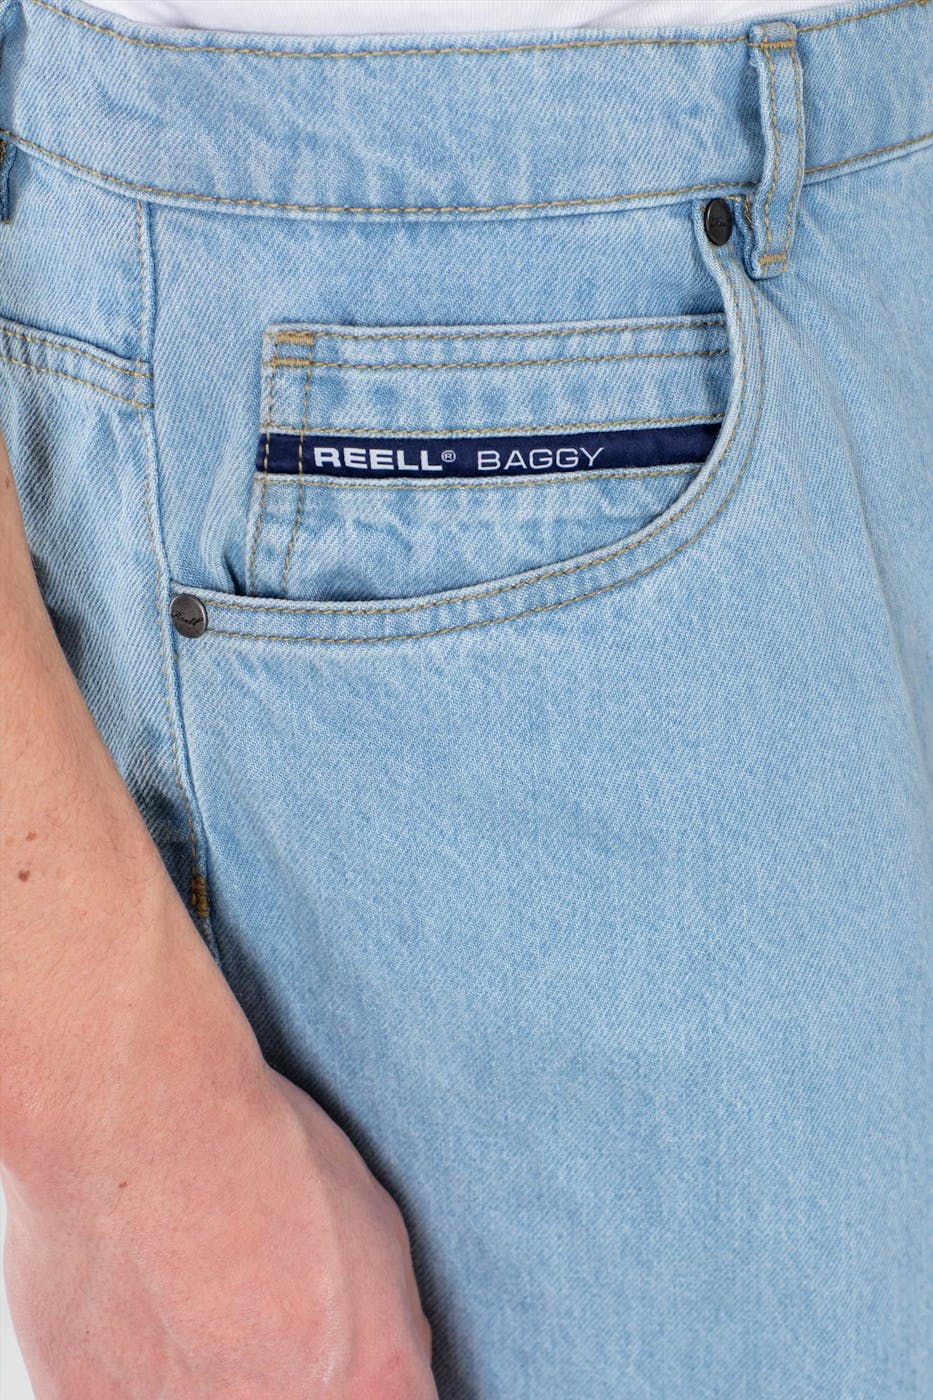 Reell - Lichtblauwe Baggy jeans